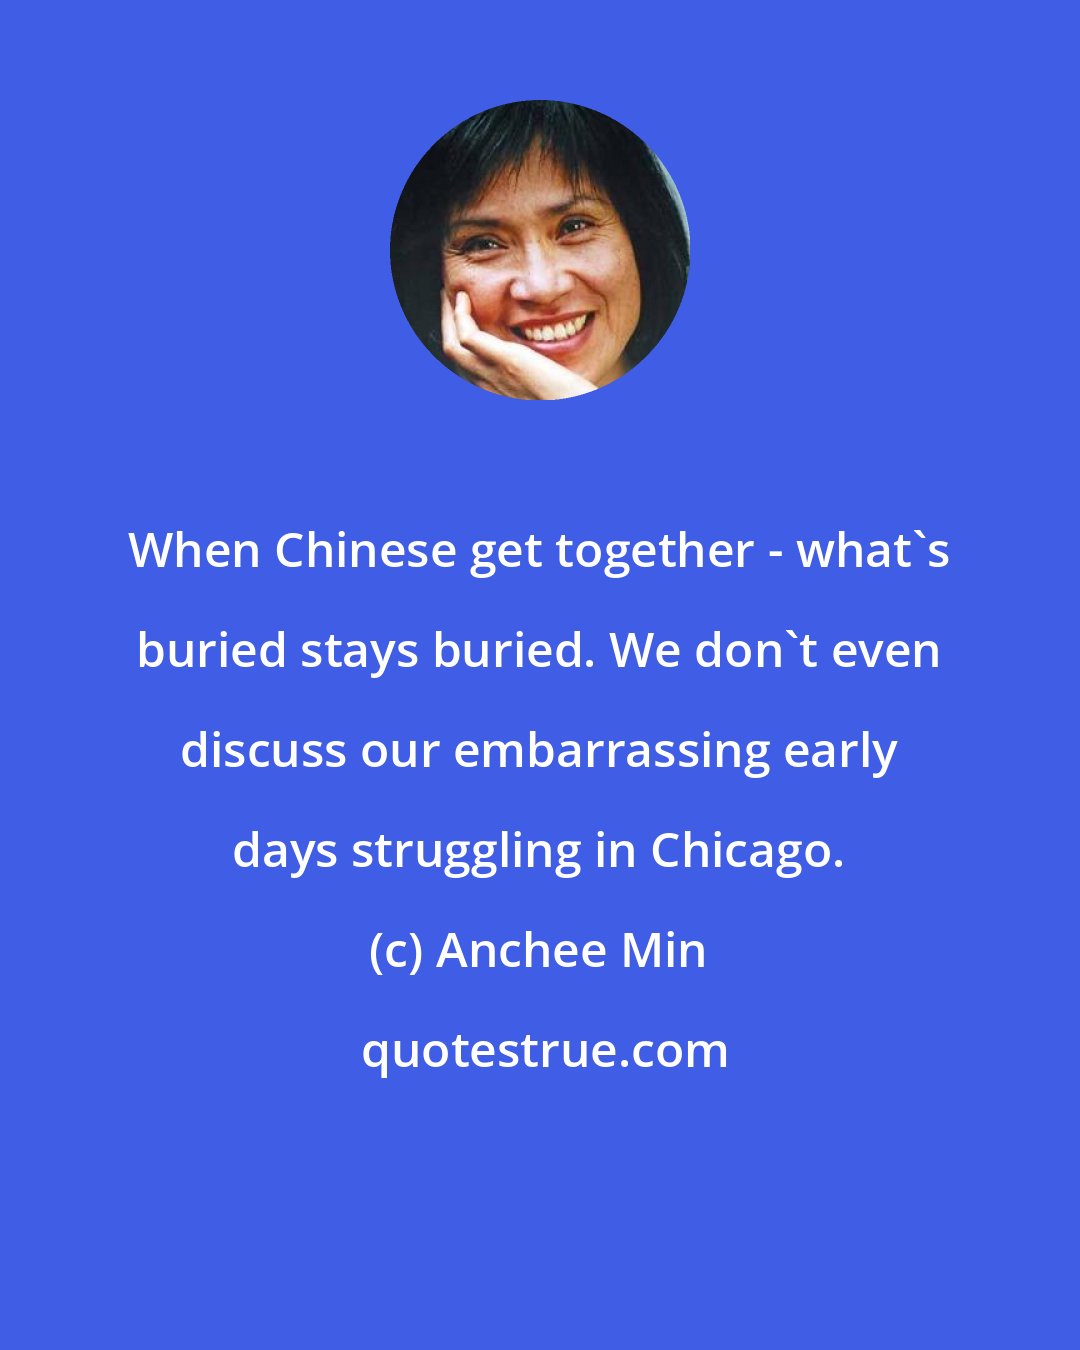 Anchee Min: When Chinese get together - what's buried stays buried. We don't even discuss our embarrassing early days struggling in Chicago.